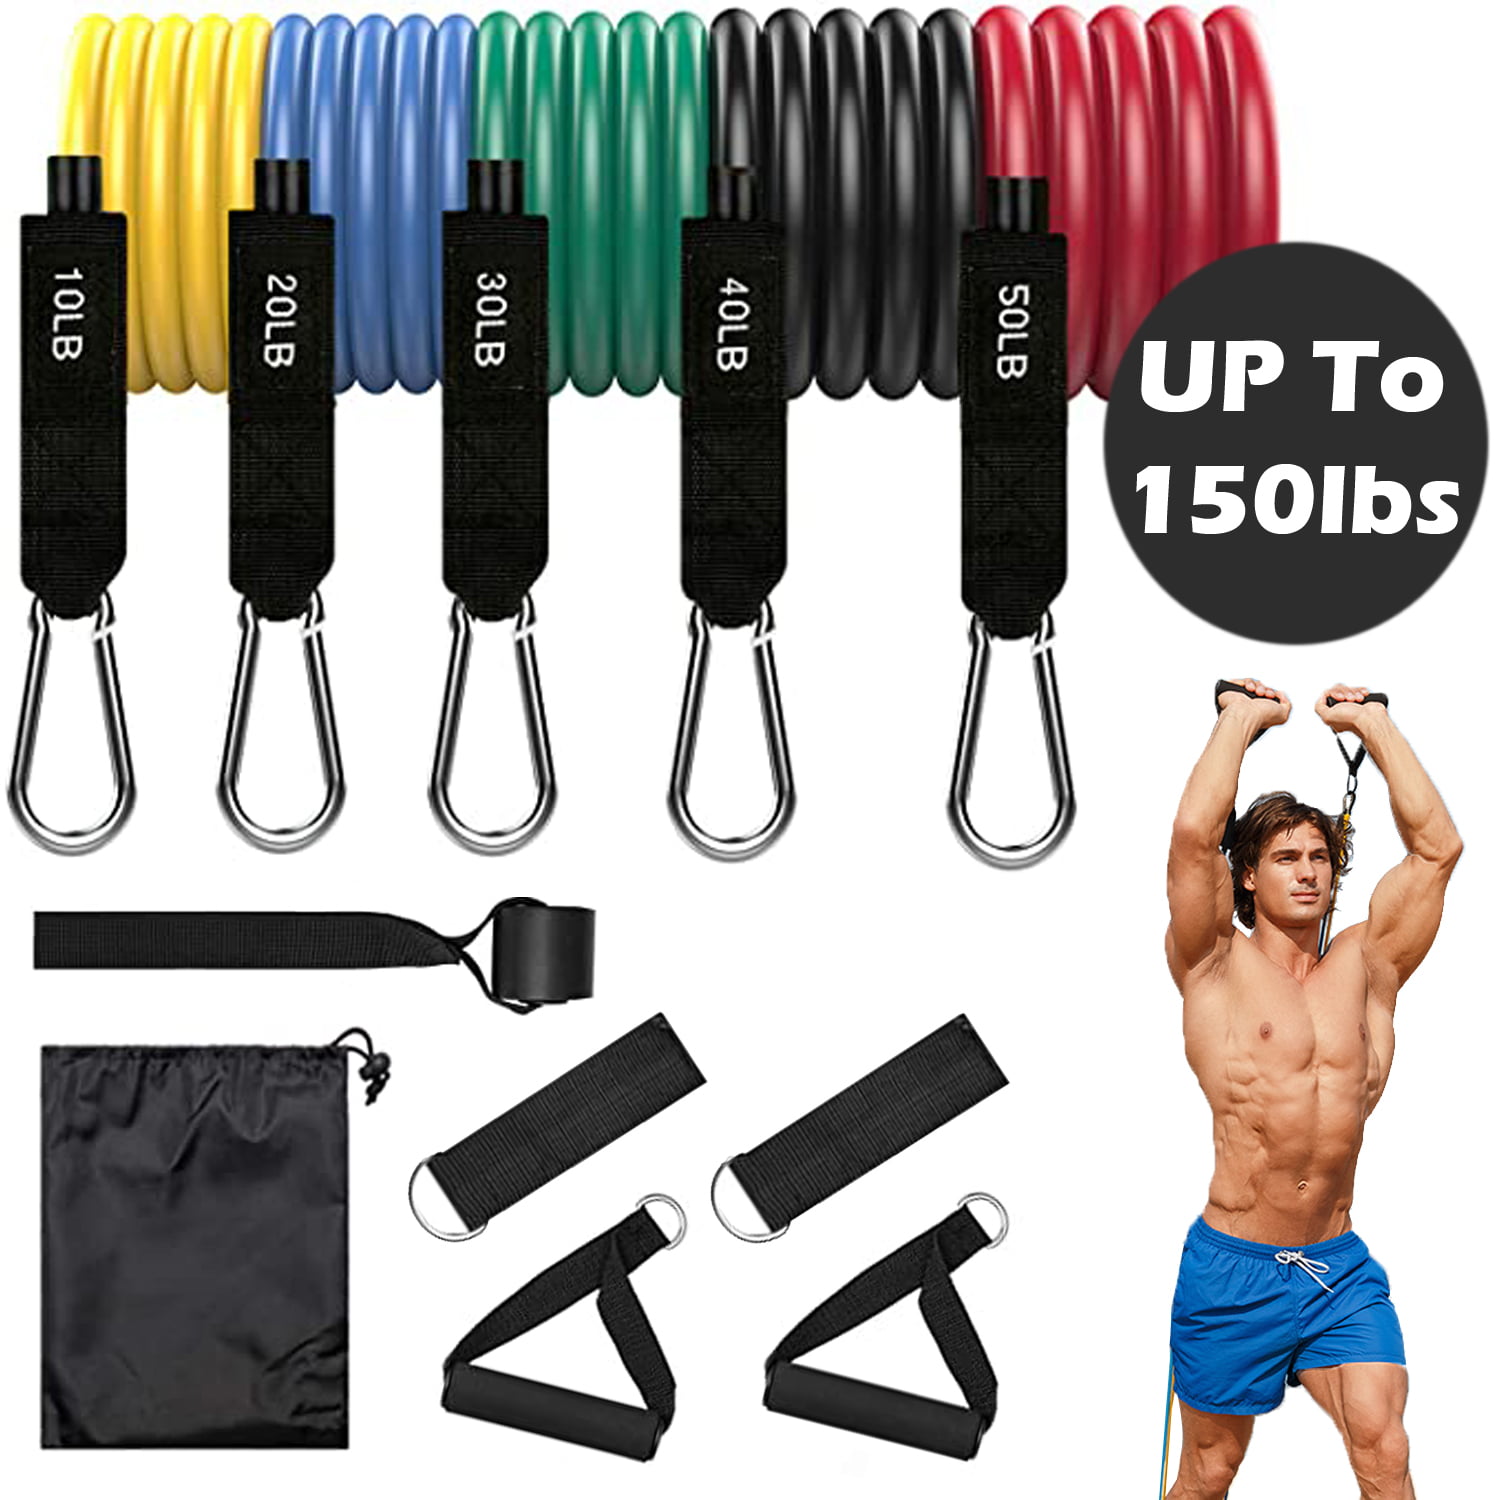 Strength Fitness Workout Resistance Bands 150lbs Set with Handles Door Anchor 